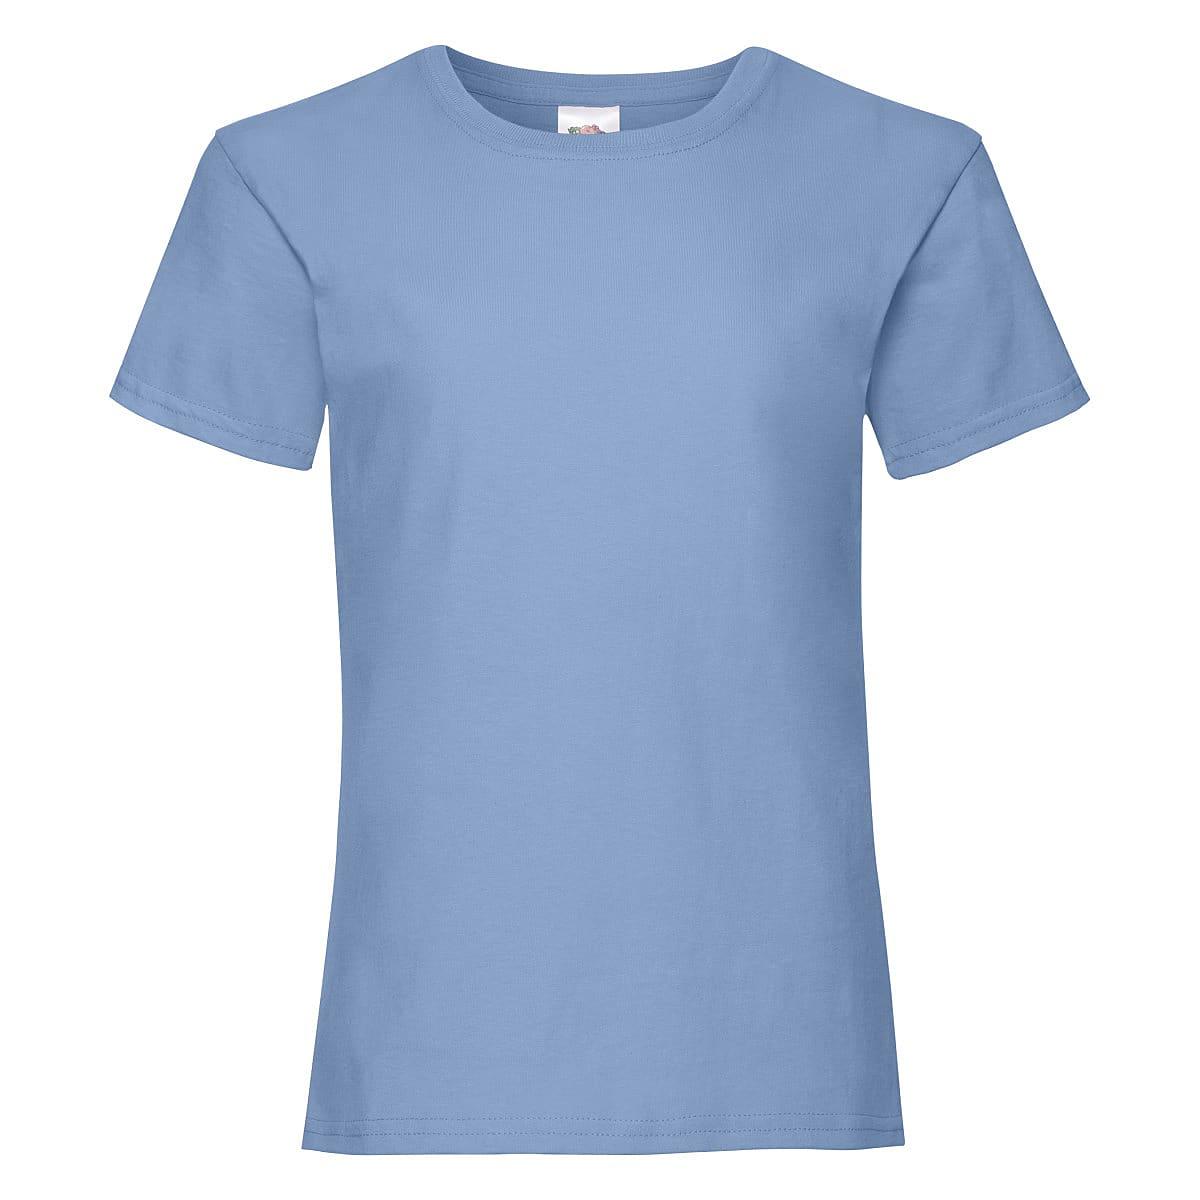 Fruit Of The Loom Girls Valueweight T-Shirt in Sky Blue (Product Code: 61005)